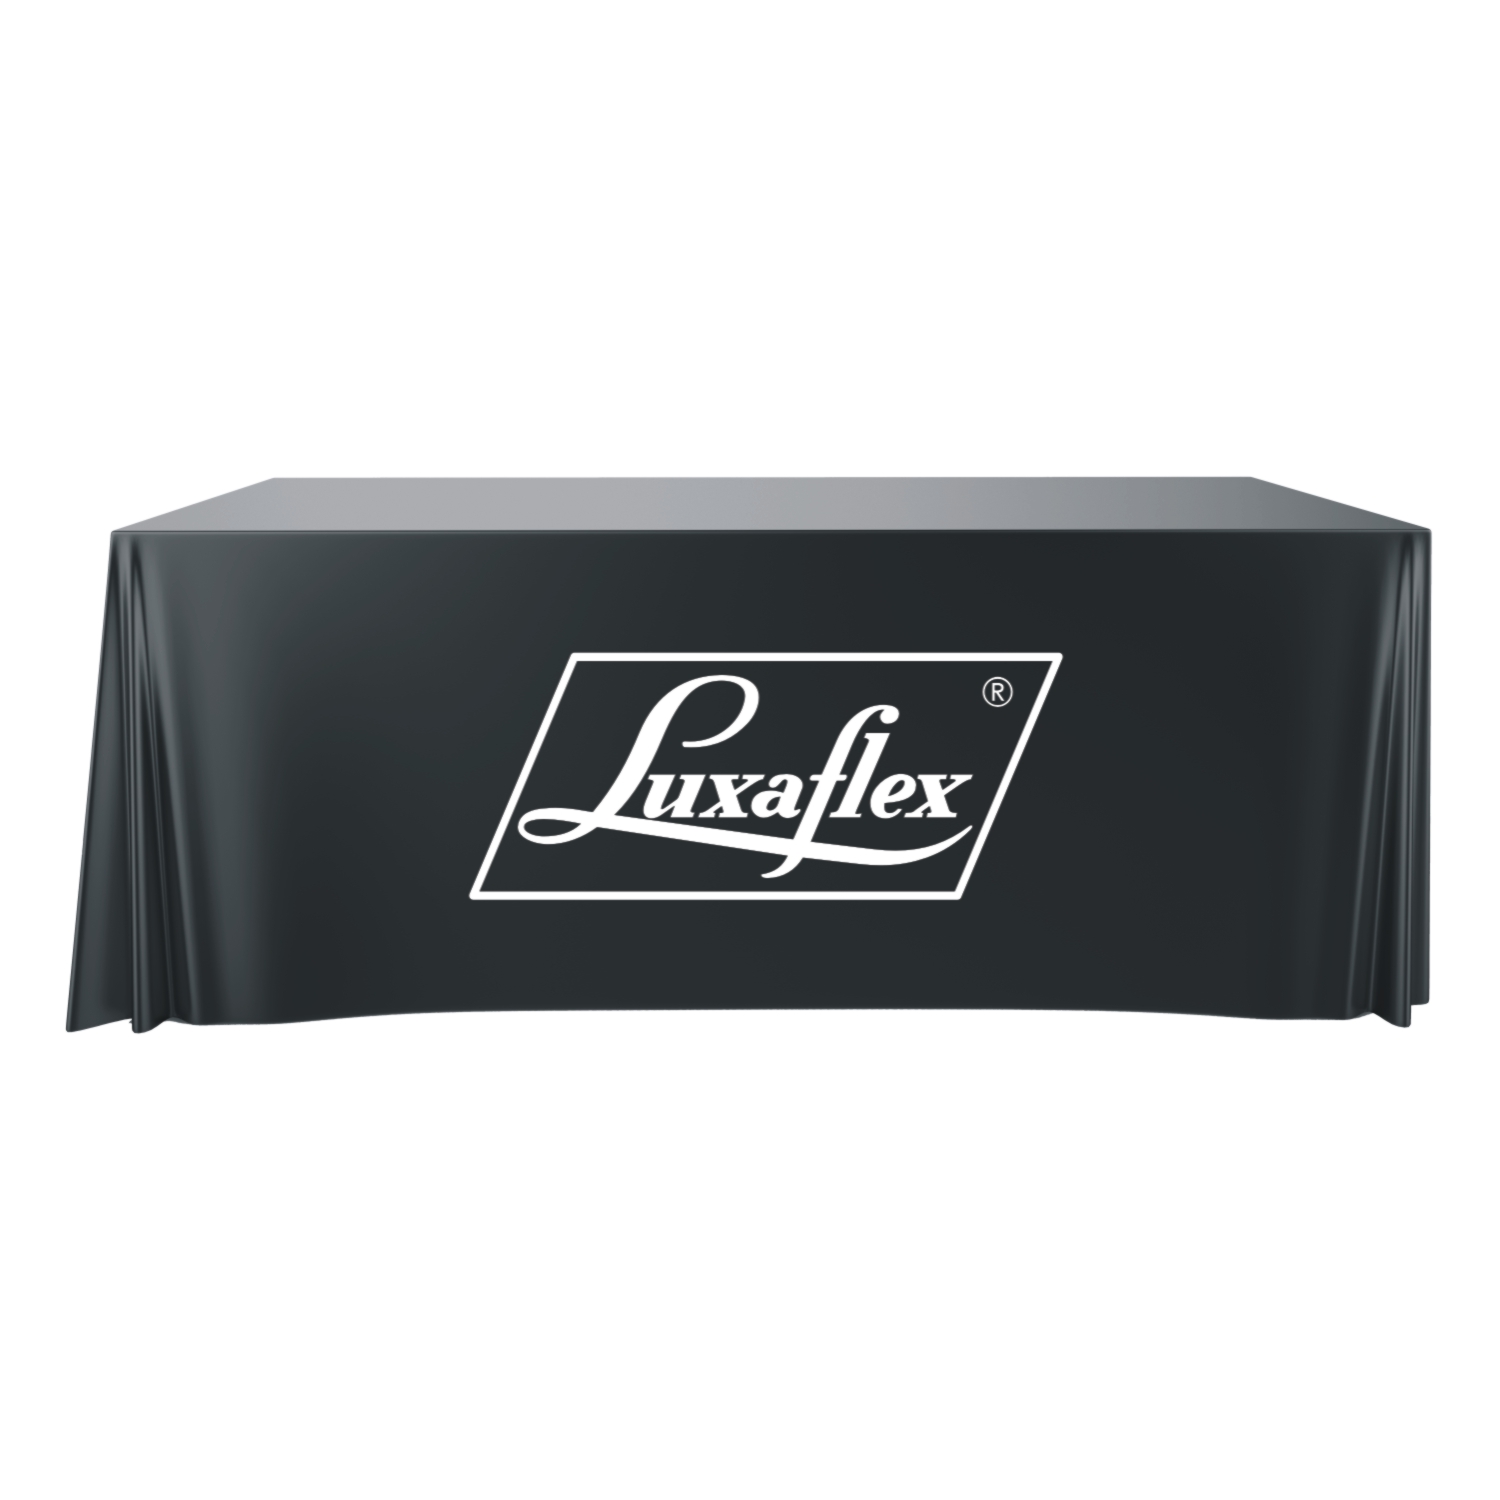 Printed Tablecloths, Exhibition Table Covers, Table Runners & Napkins